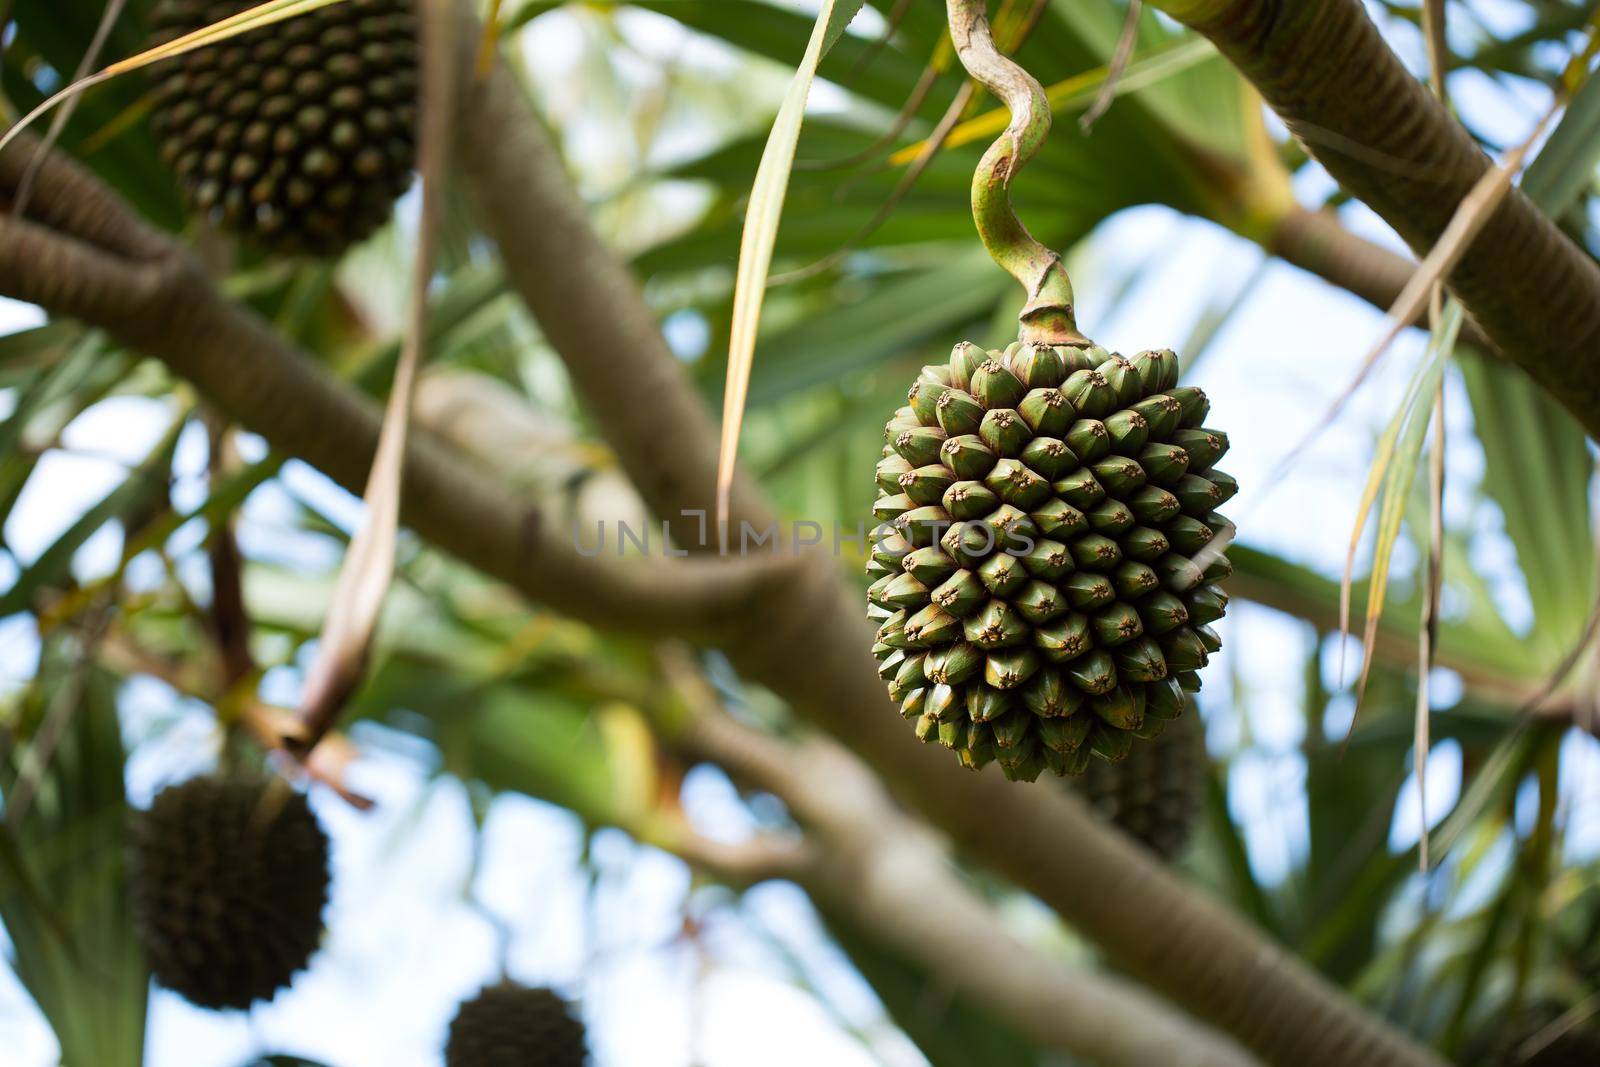 Pandanus fruits grow on a tree on the island by StudioPeace